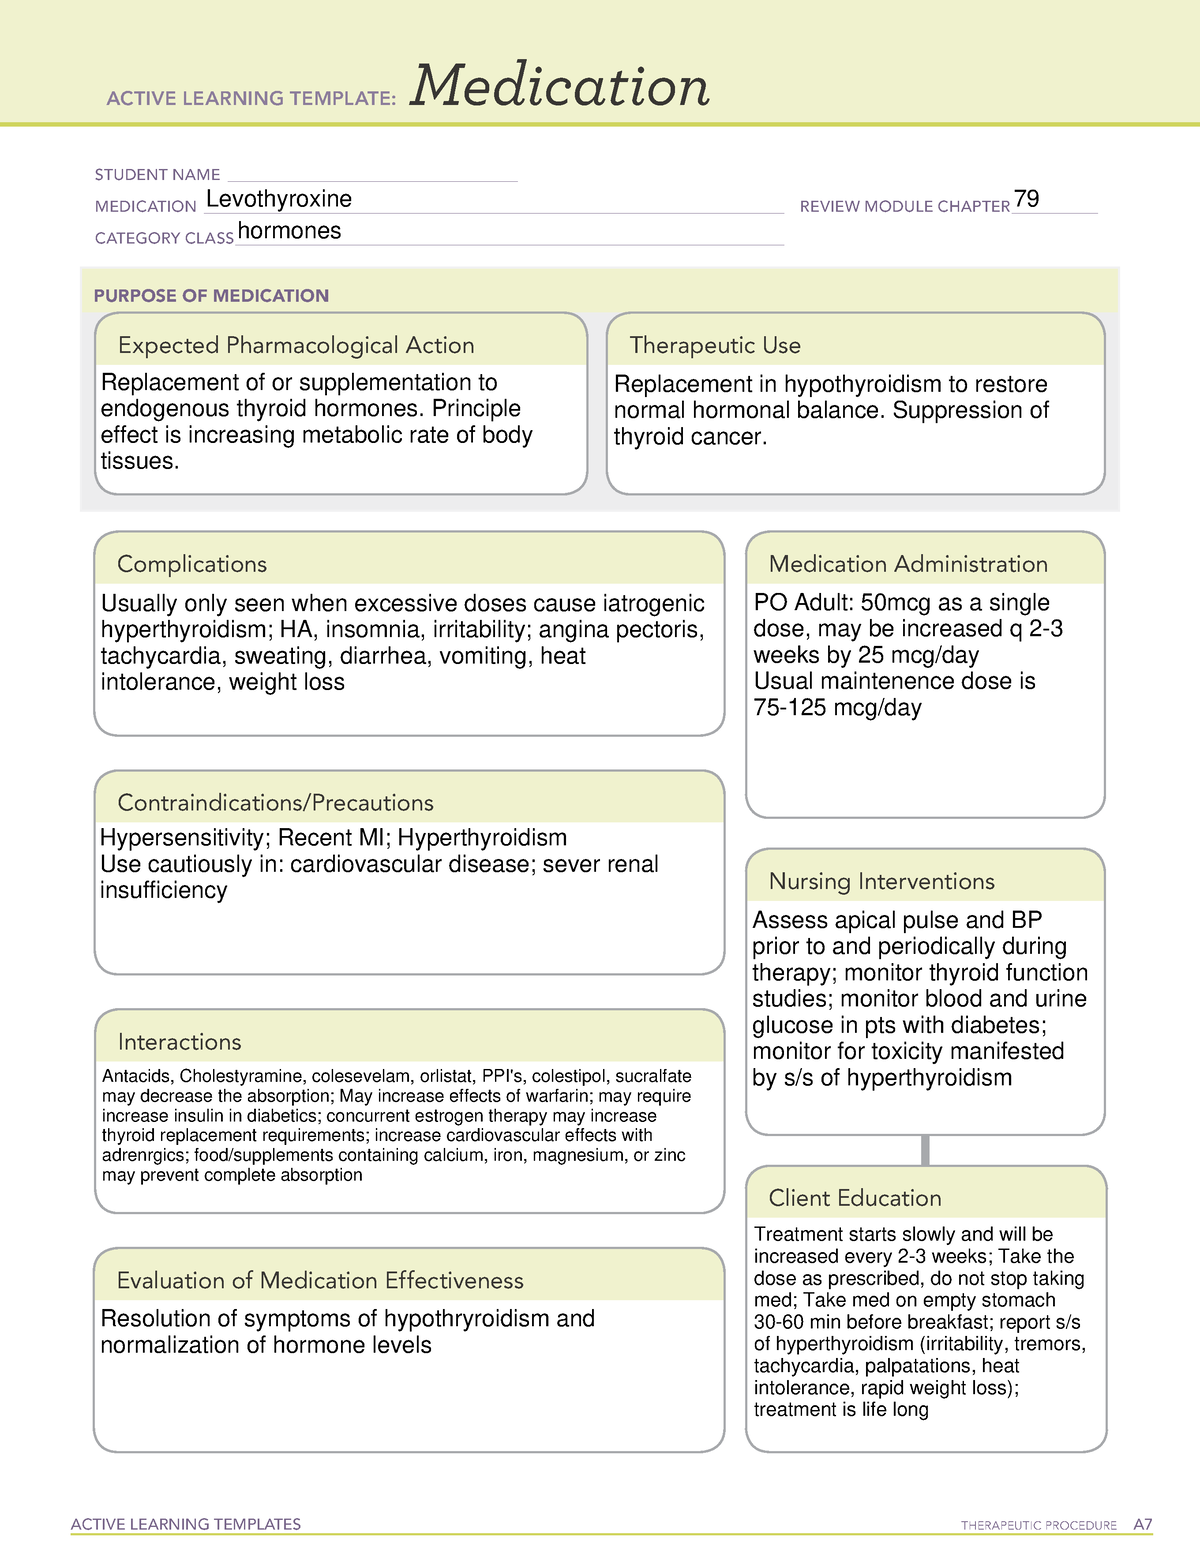 Levothyroxine ATI medication Template ACTIVE LEARNING TEMPLATES